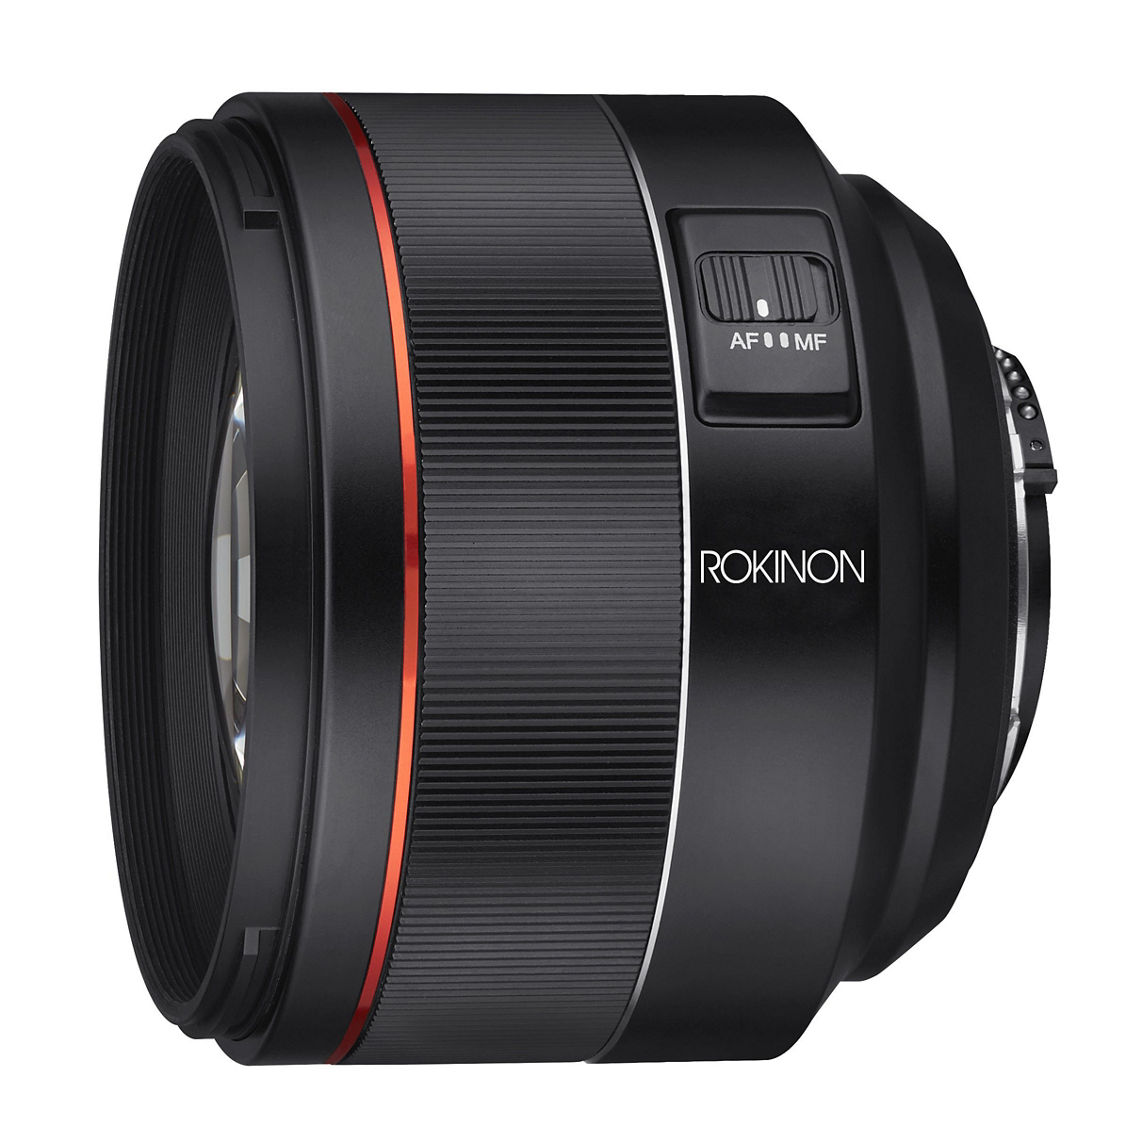 Rokinon 85mm F1.4 AF High Speed Full Frame Telephoto Lens for Nikon F - Image 3 of 5